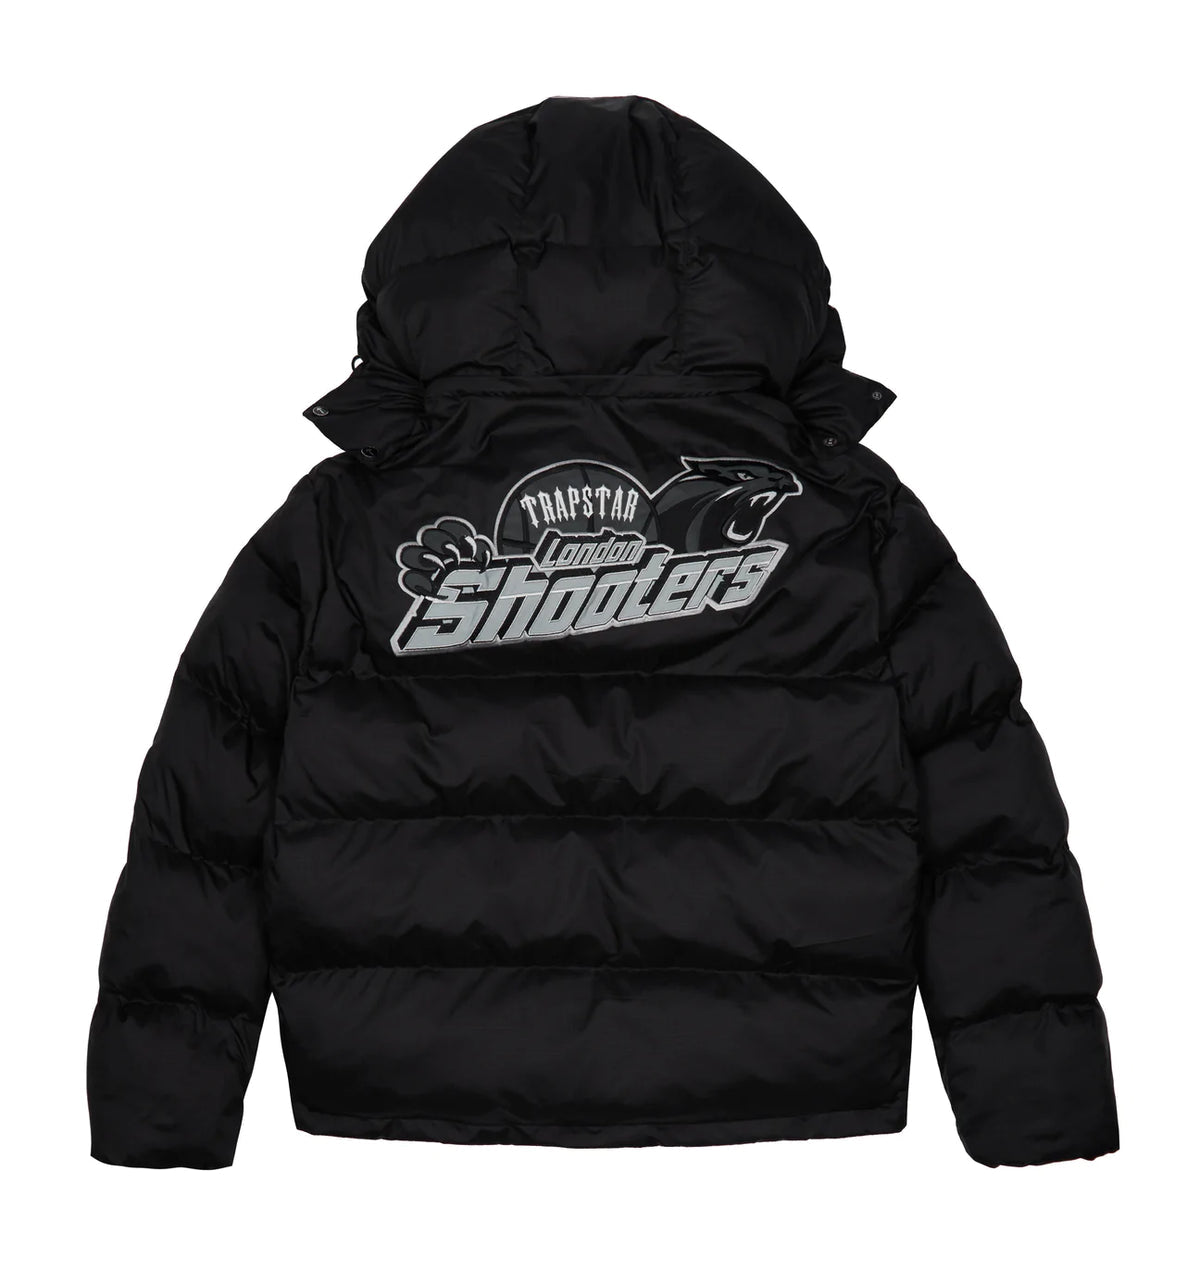 TRAPSTAR SHOOTERS HOODED PUFFER JACKET ‘BLACK REFLECTIVE’